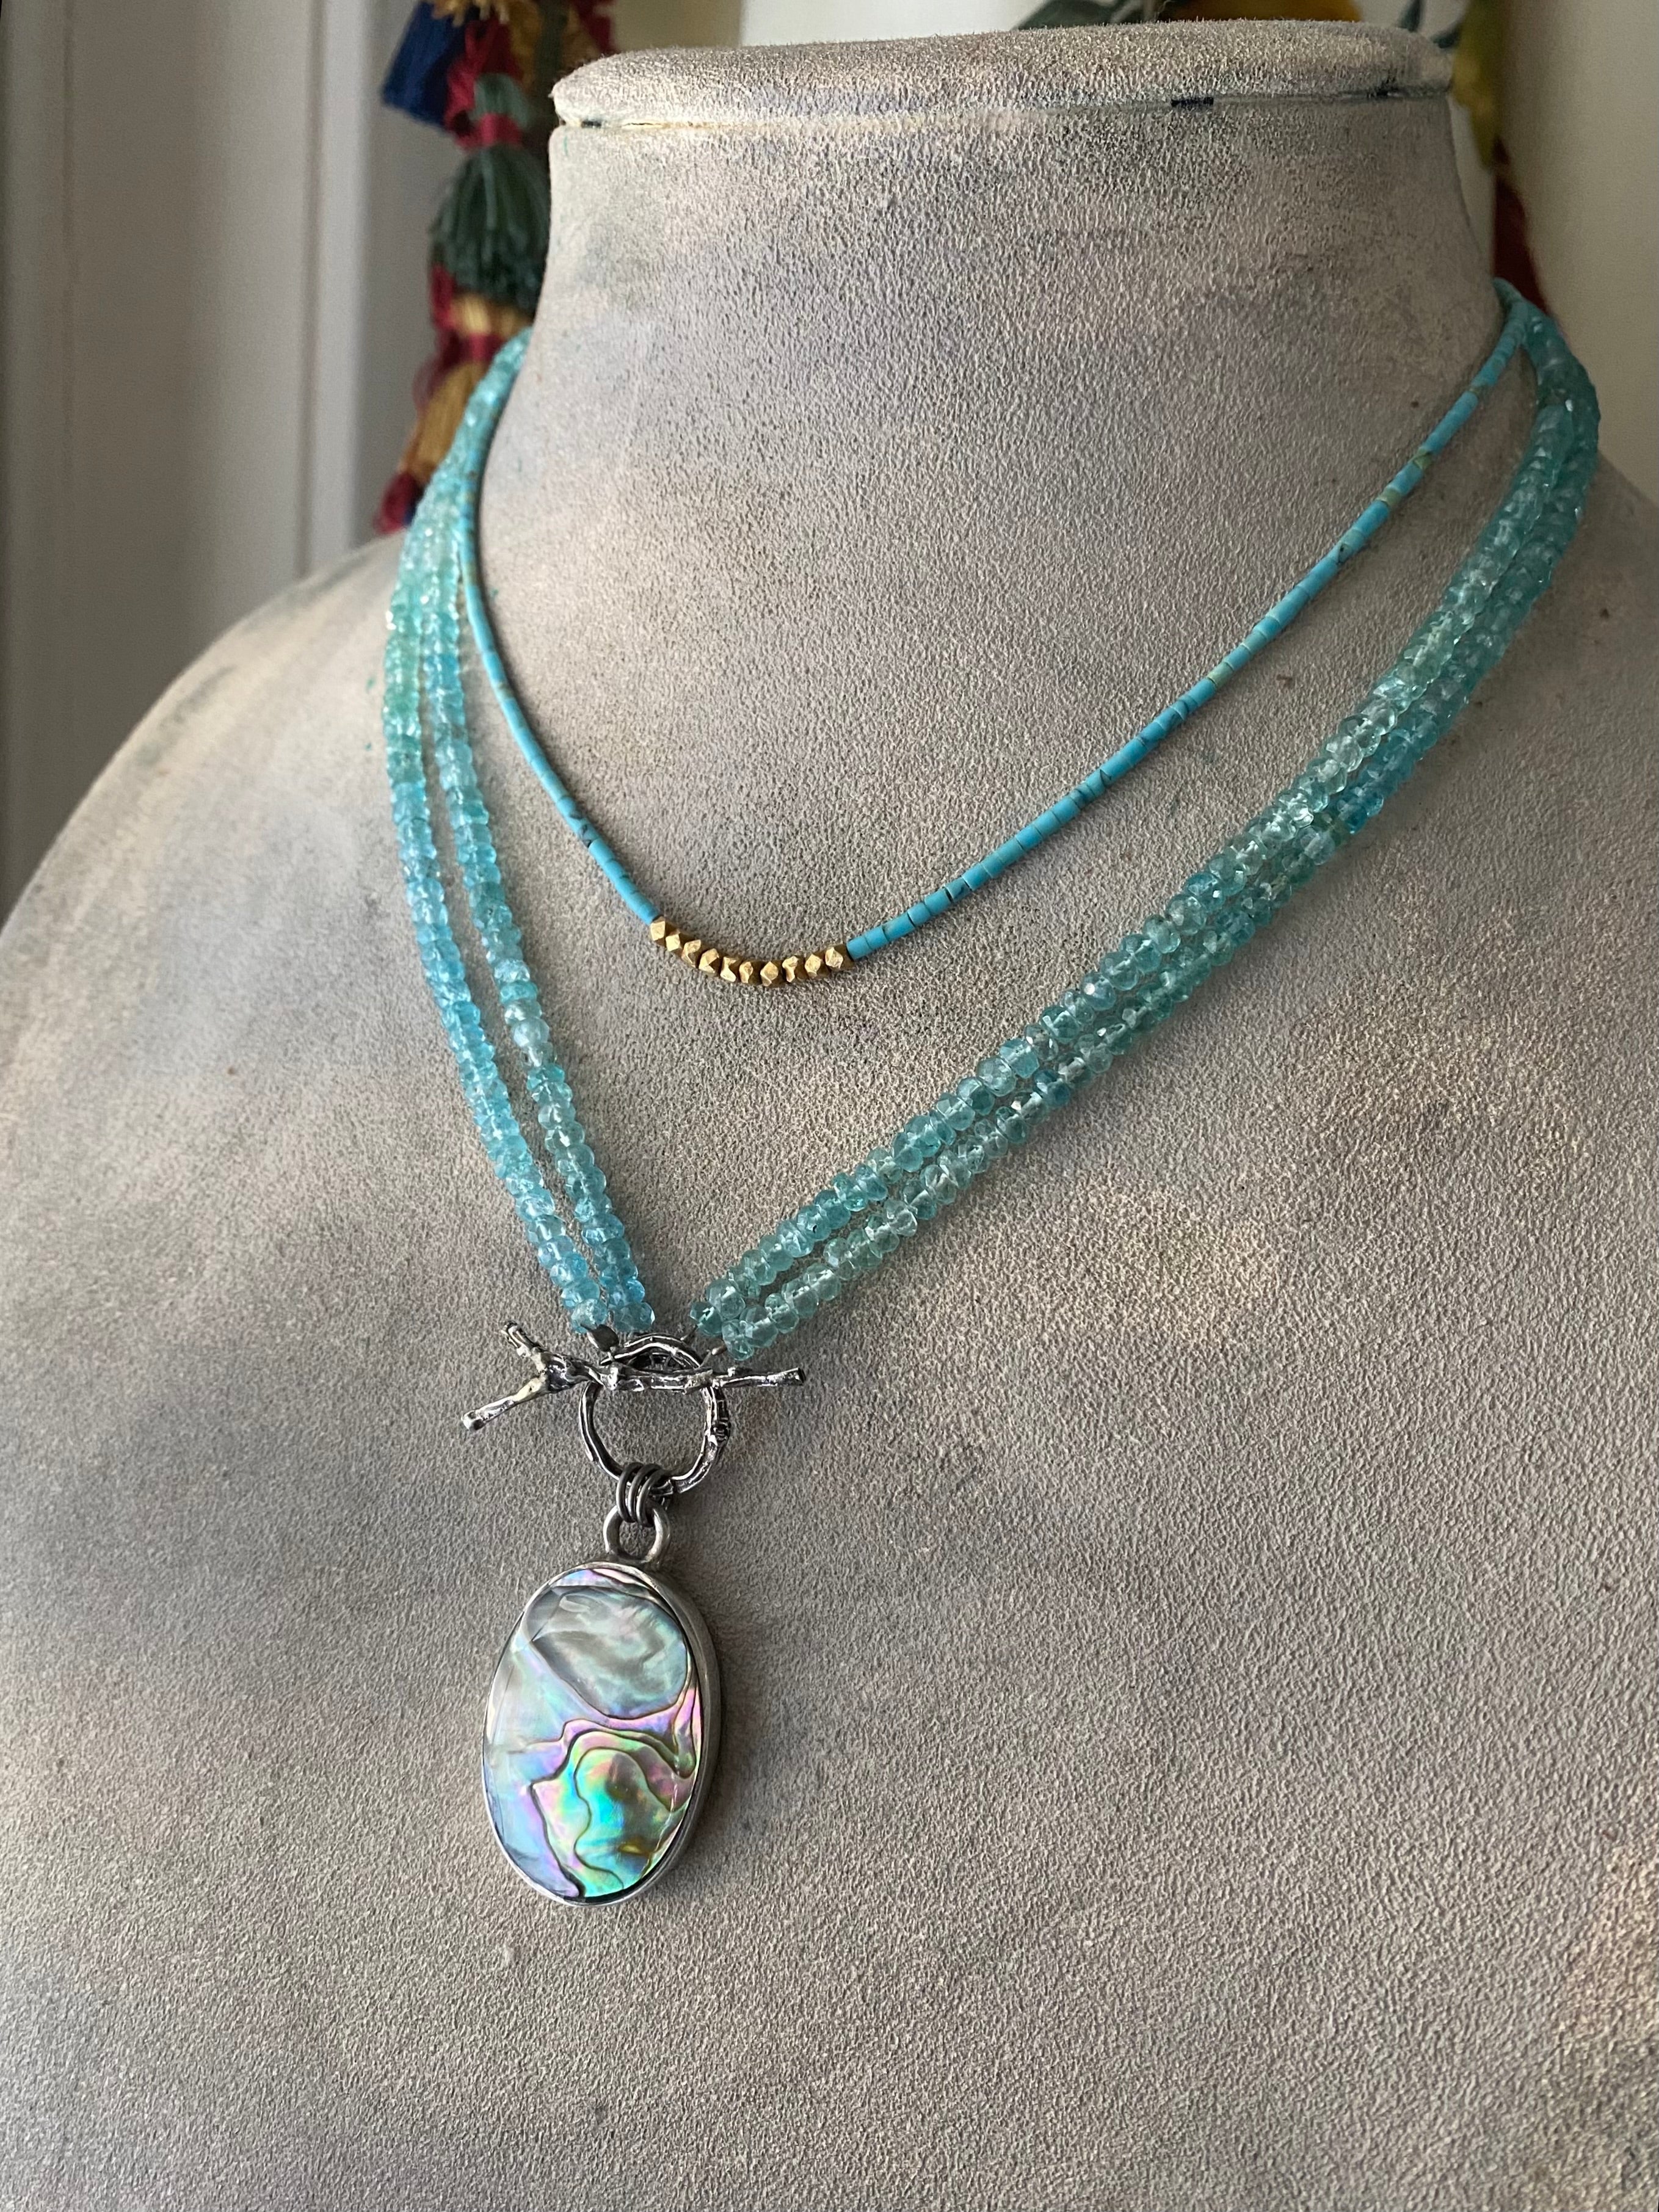 Apatite wrap necklace with abalone